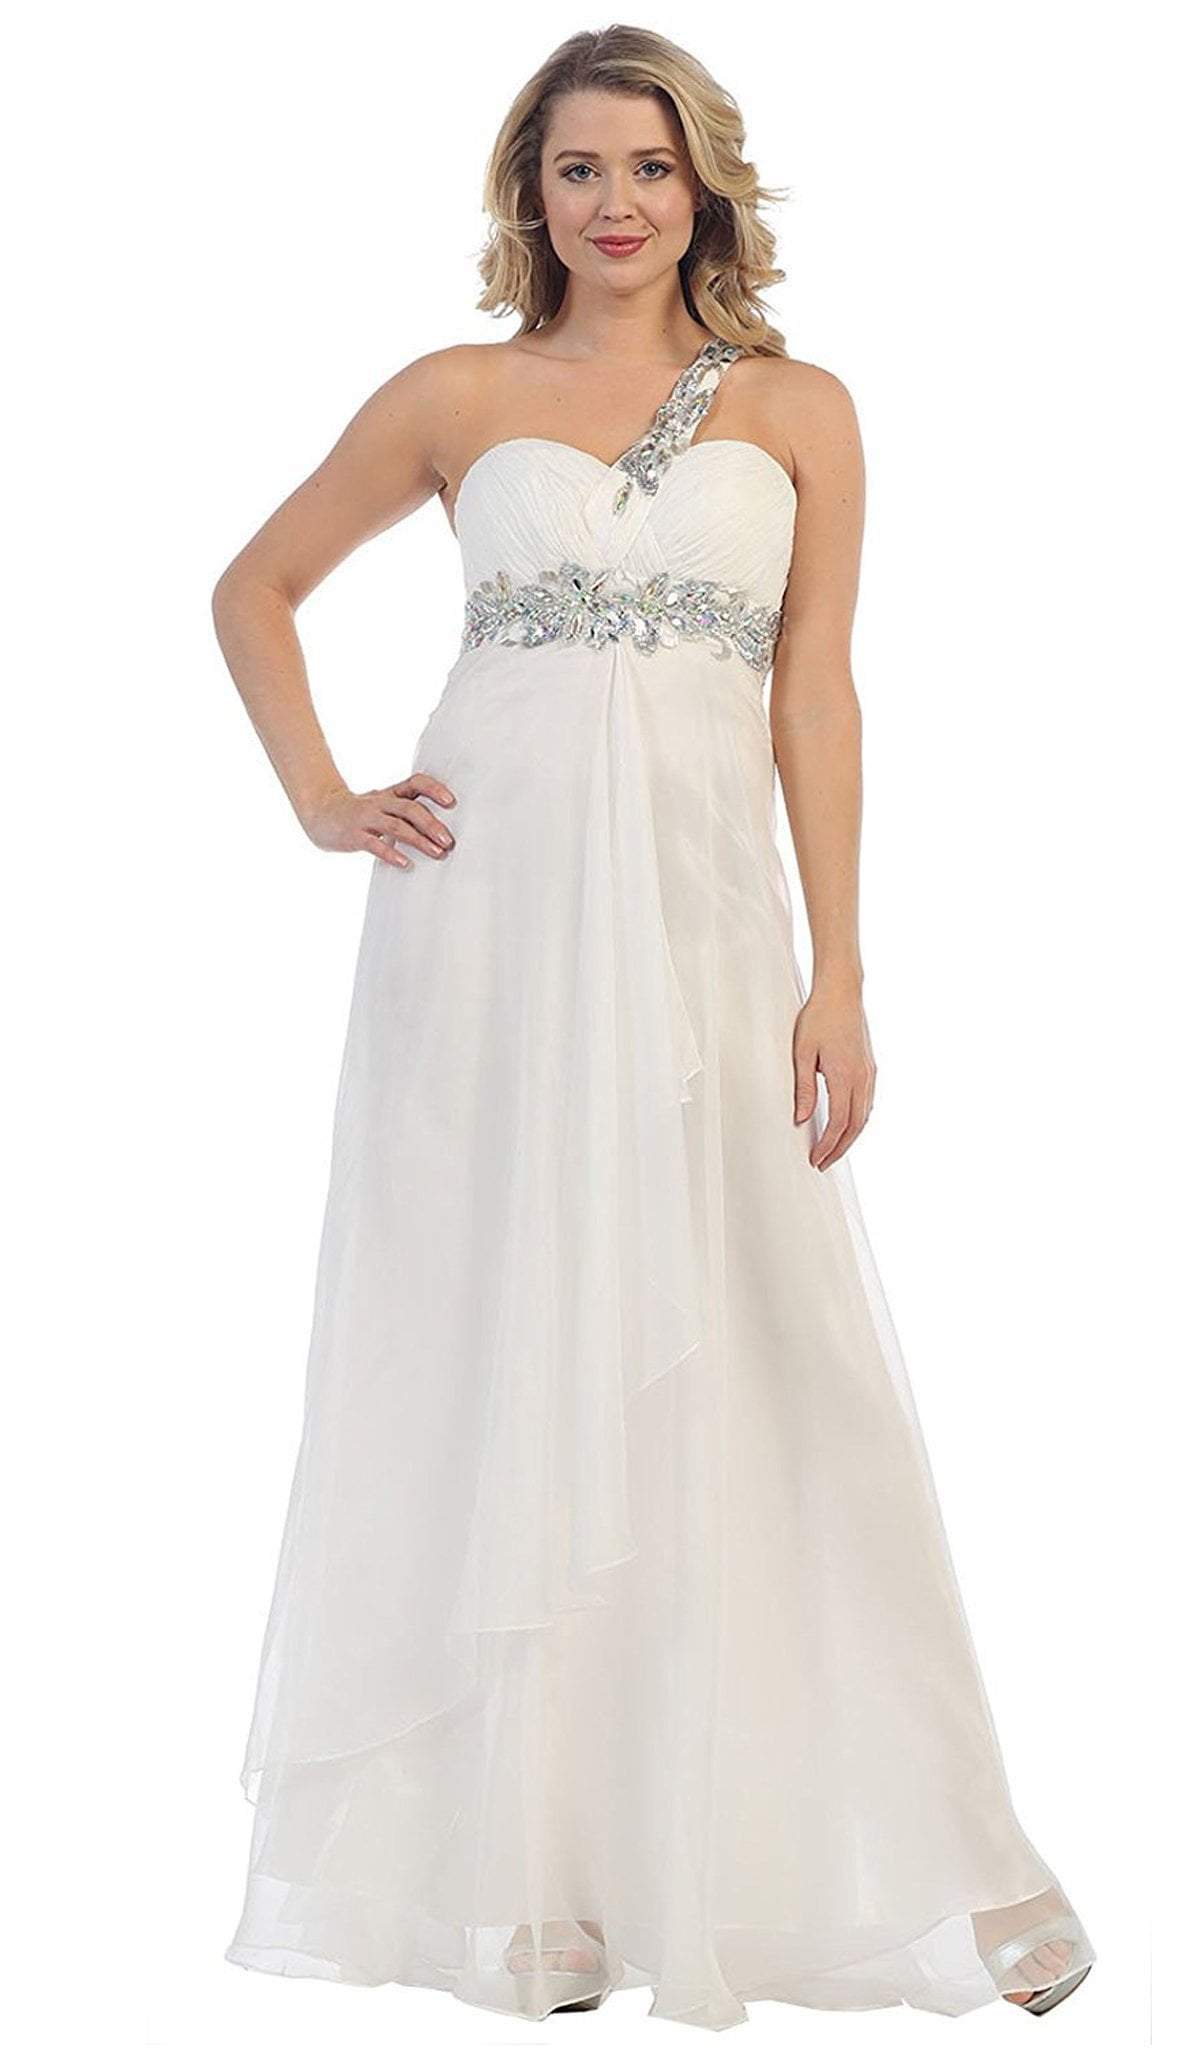 May Queen - MQ1028 Ornate Strap Ruched Sweetheart A-line Prom Dress Special Occasion Dress 4 / Ivory